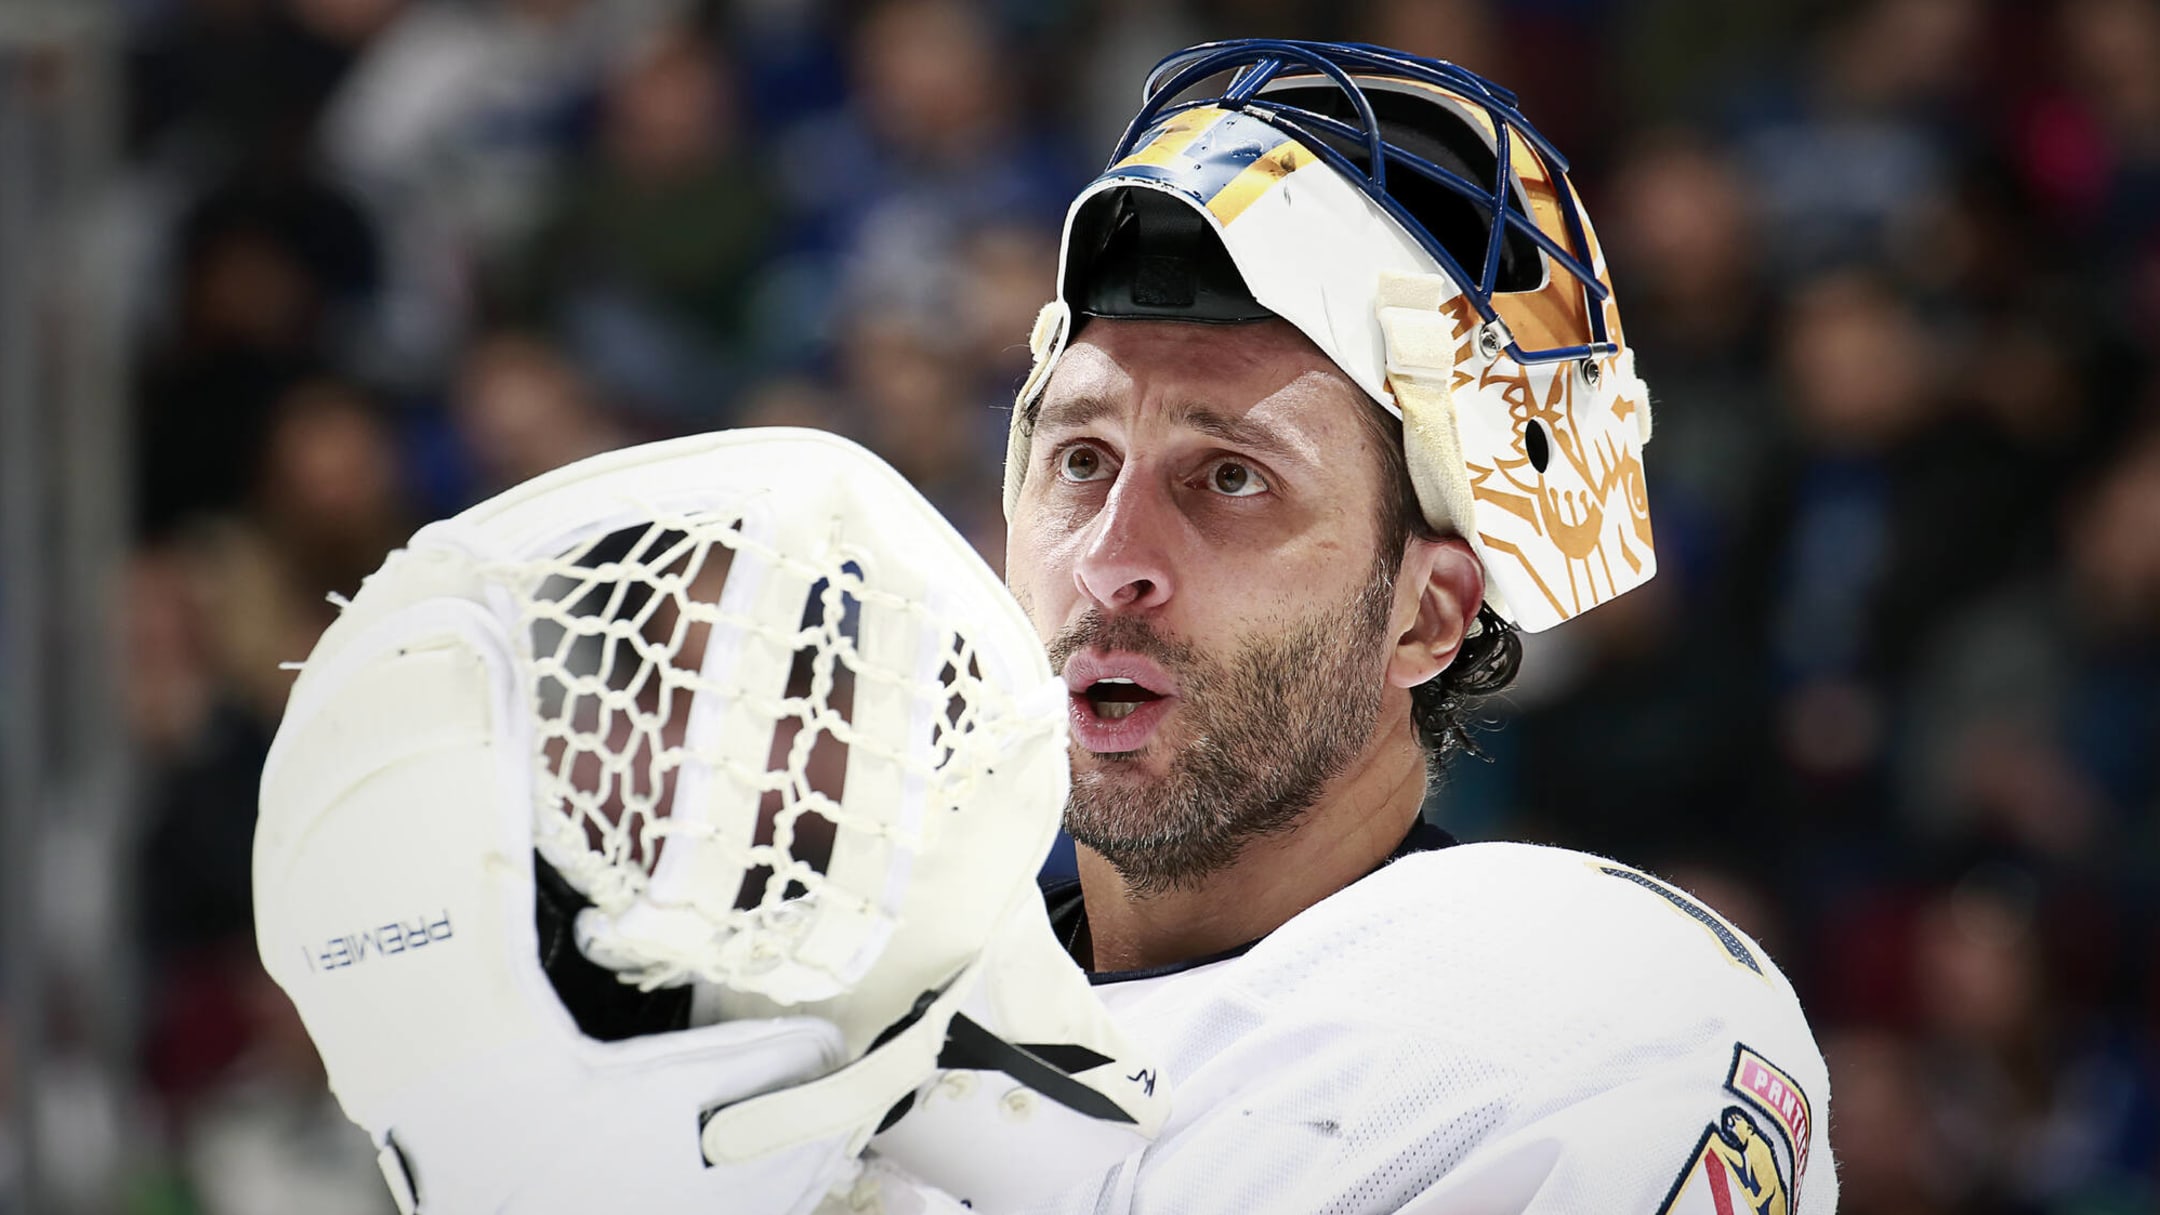 NHL Award Watch: Panthers' Roberto Luongo is NHL's first half MVP 